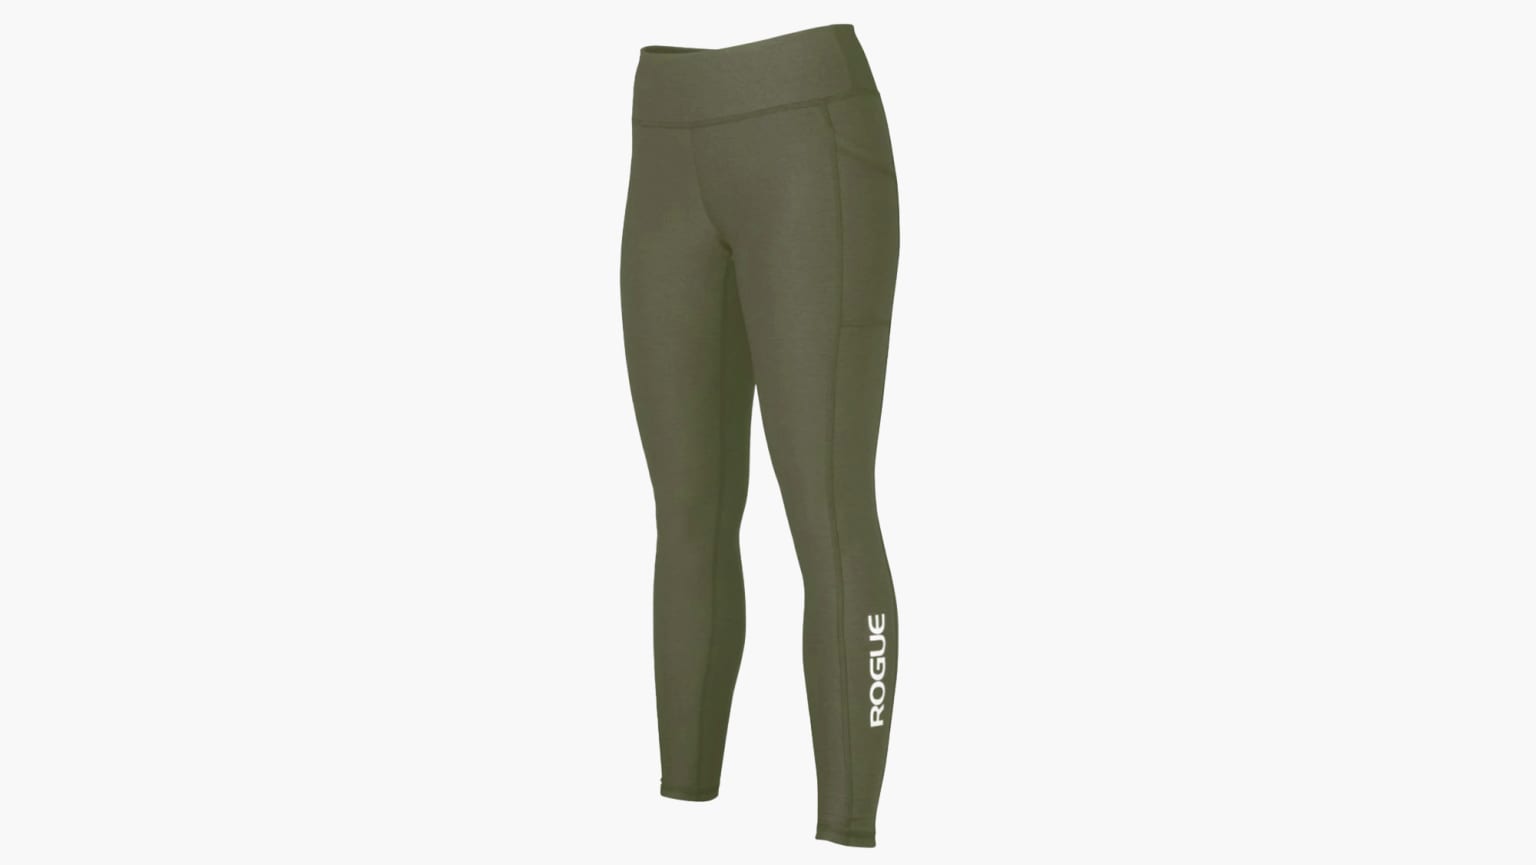 Women's Active Full Length Workout Legging - Sustainable